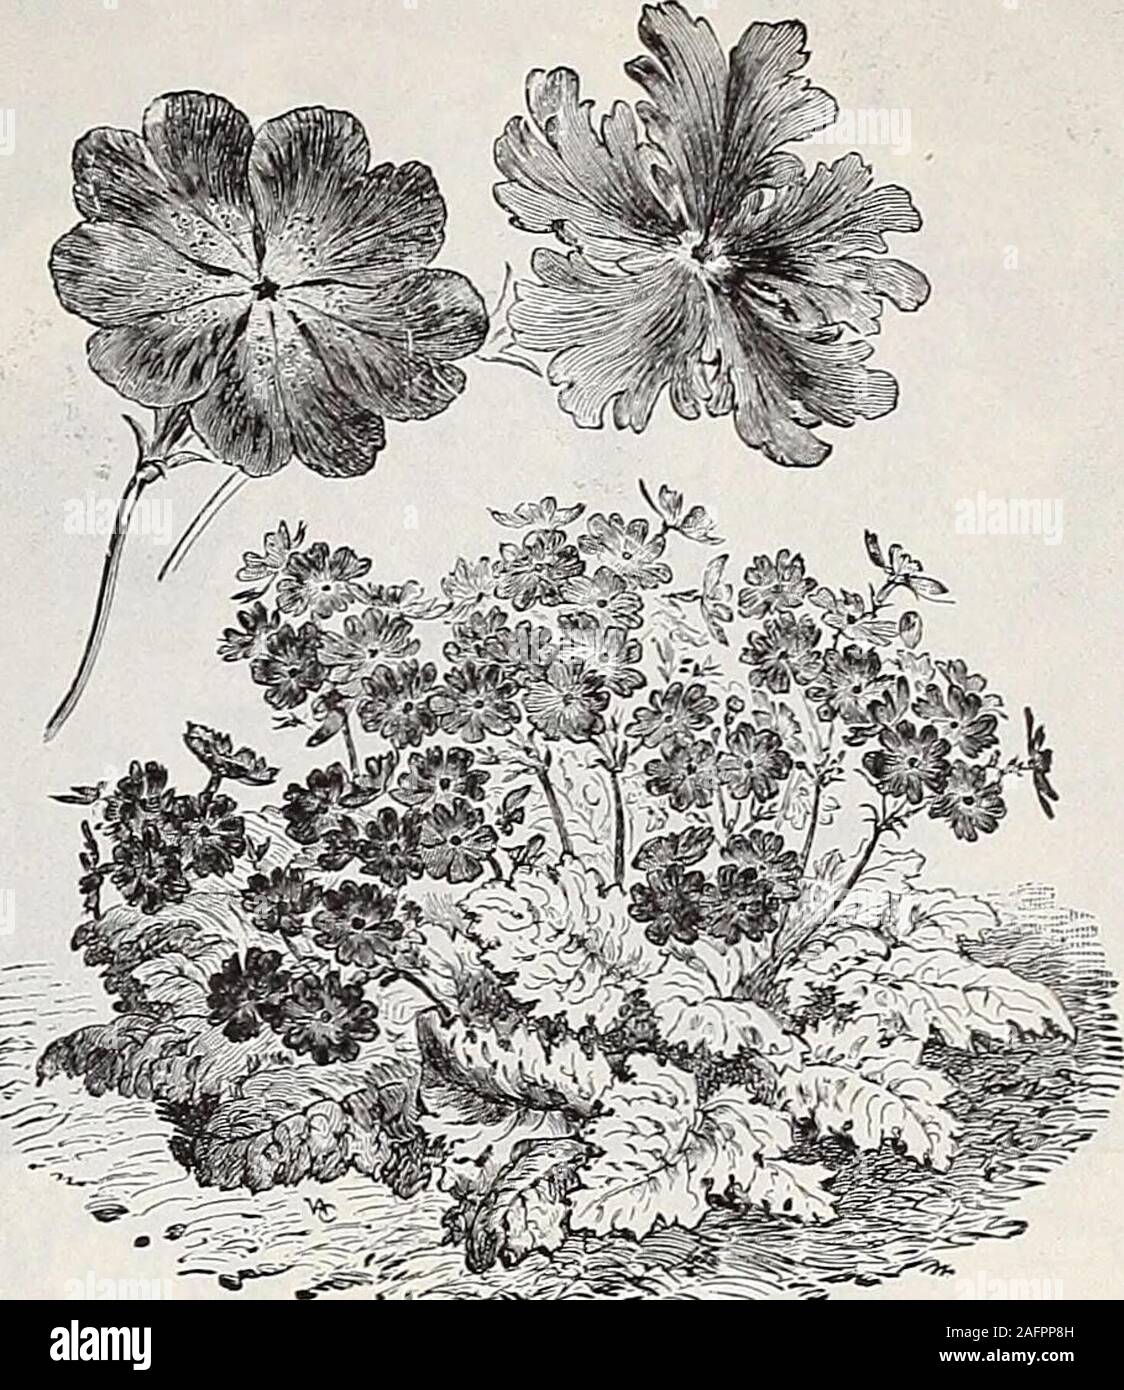 . Dreer's wholesale price list : seeds for florists plants for florists bulbs for florists vegetable seeds, fungicides, fertilizers, insecticides implements, sundries, etc. .SCABIOSA CAUCASICA PRIMULA CORTUSOIDES SIEBOLDI Rudbeckia. (Cone Flower.) Per doz. PulSida. 4-inch pots |i 00 Golden Glow. Strong, 4-inch pots 85 Maxima. 3-inch pots i 25 Newmani. Strong, 4-inch pots i 00 Nitida, Autumn Glory. 4-inch pots i 00 AutumnSun. Bright primrose-yellow . 150Purpurea. (Giant Purple Cone Flower.) Strong, 3-inch pots i 00 Sub°Tomentosa. 4-inch pots i 00 Rays of Gold. In this new variety we have arefin Stock Photo